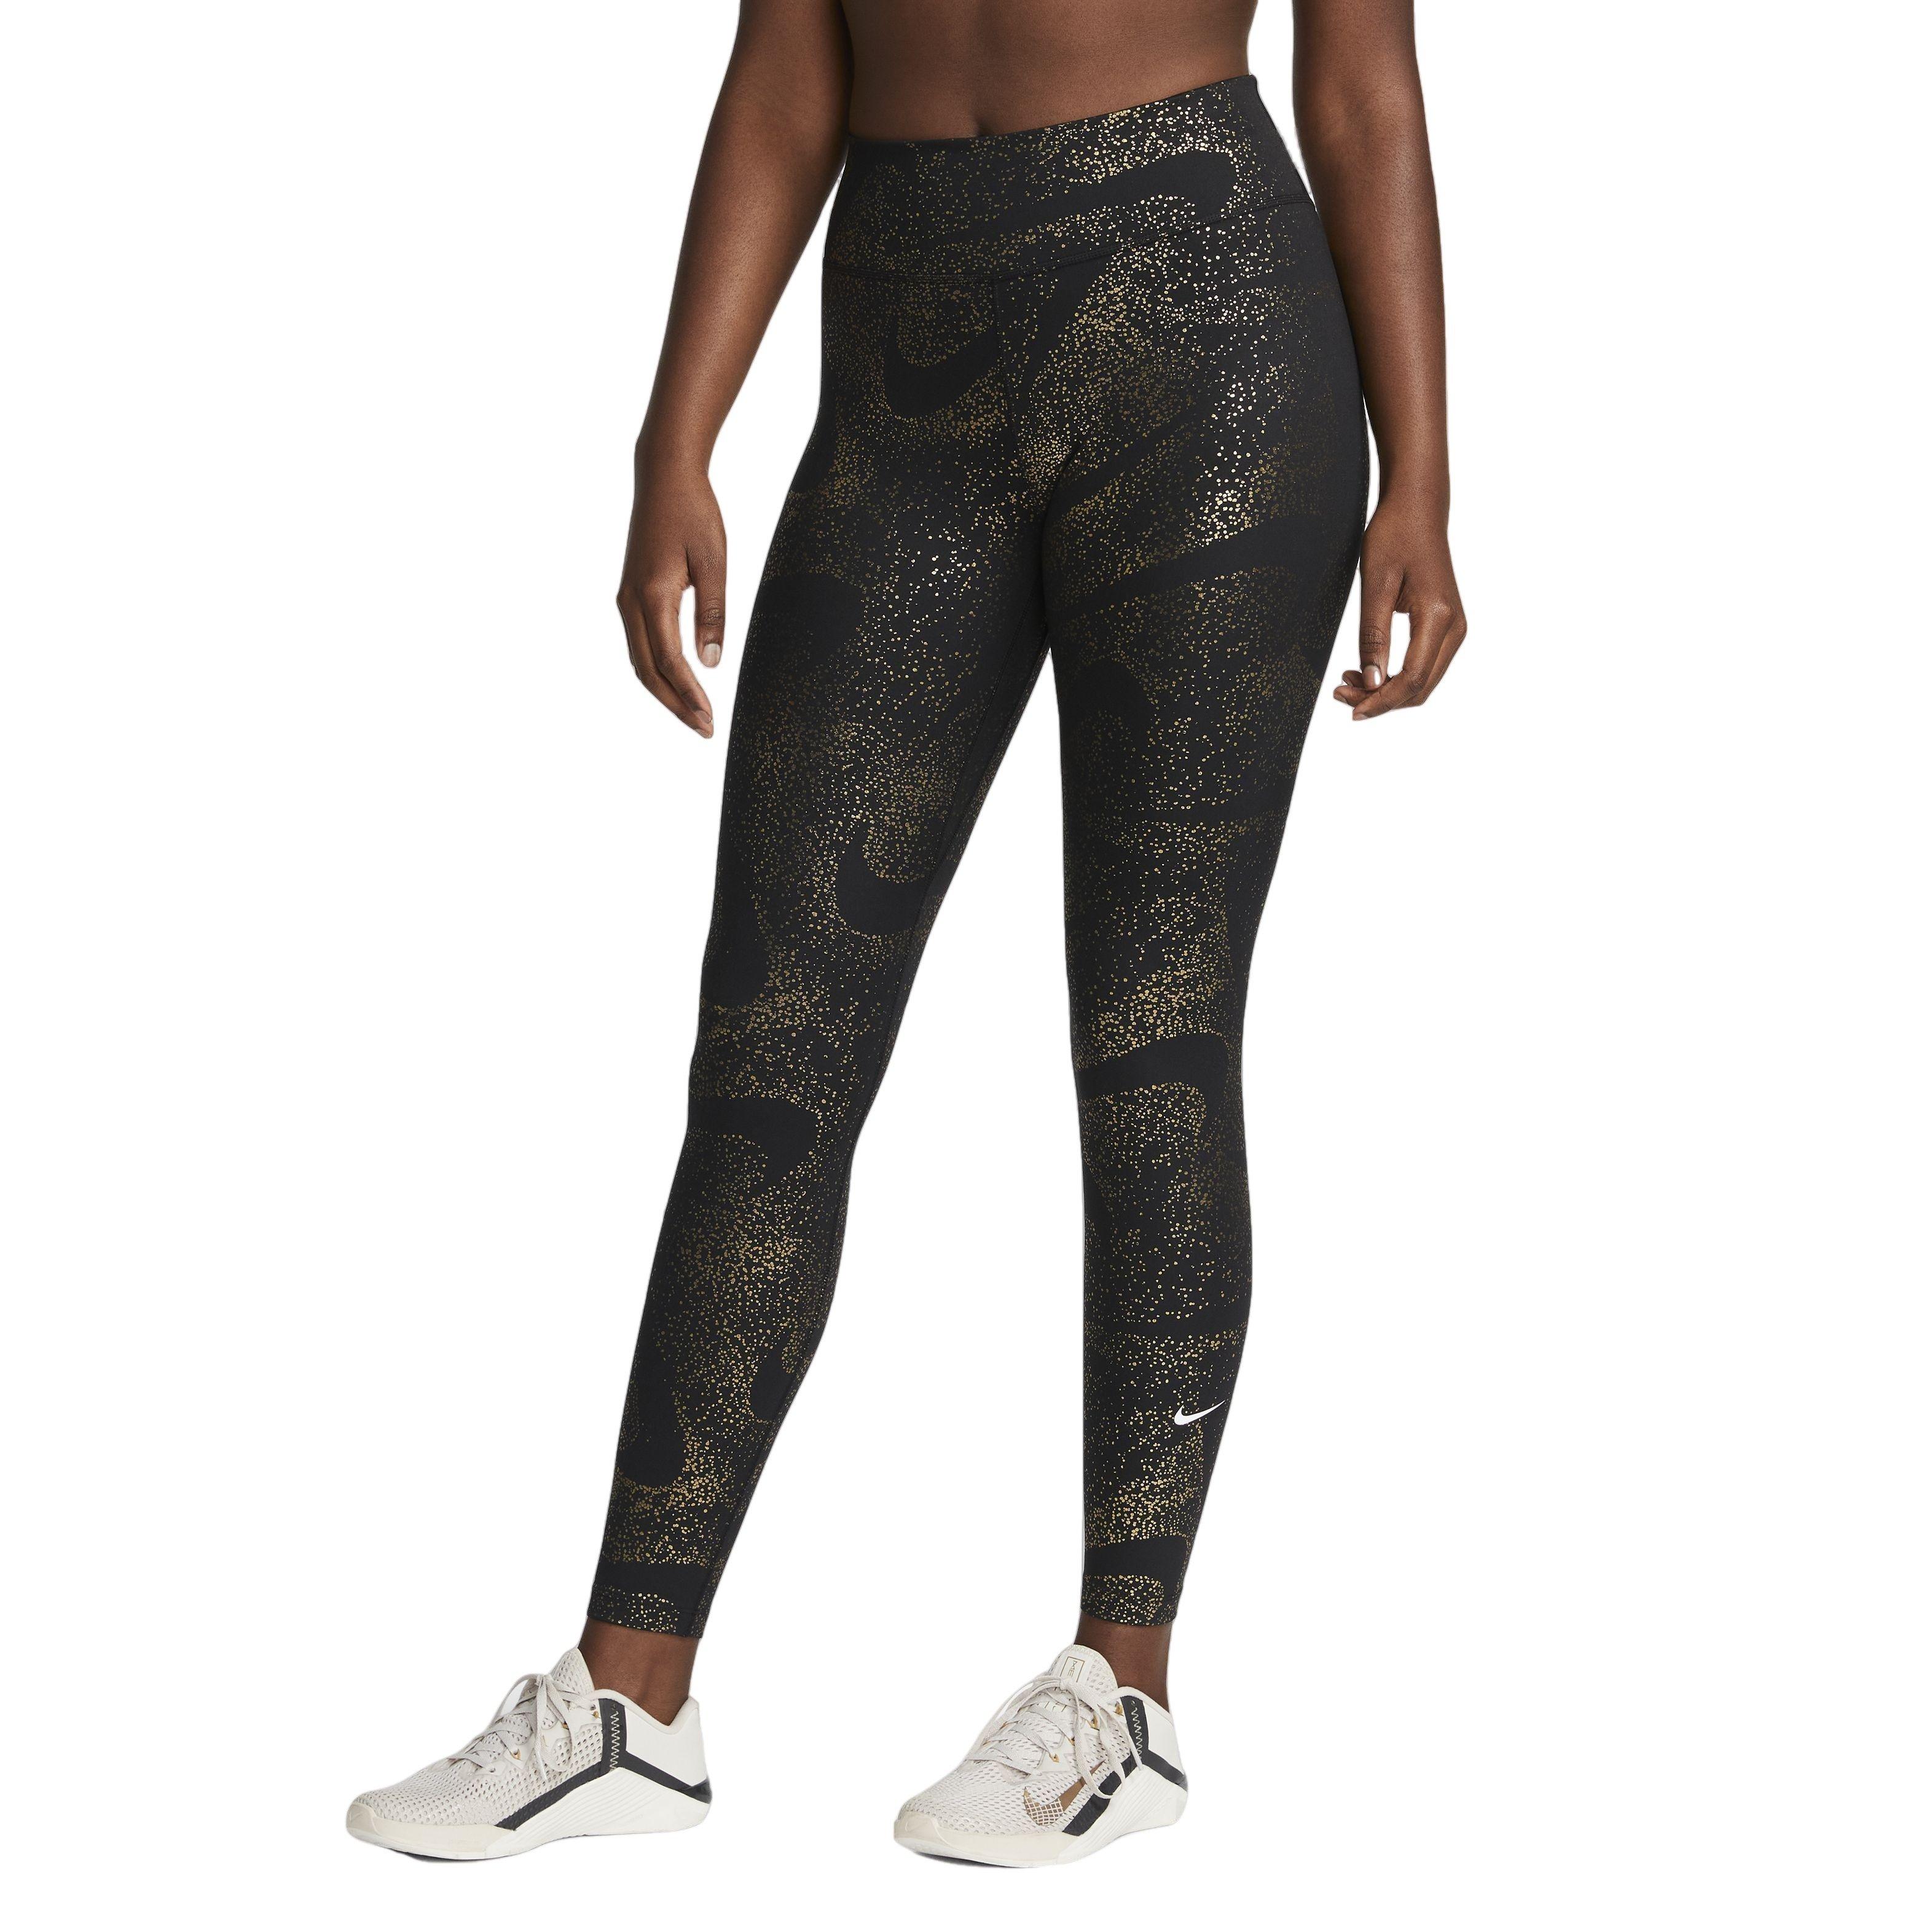 Nike Pro Leggings Black/Gold Sparkle Black Size M - $25 (61% Off Retail) -  From Abby